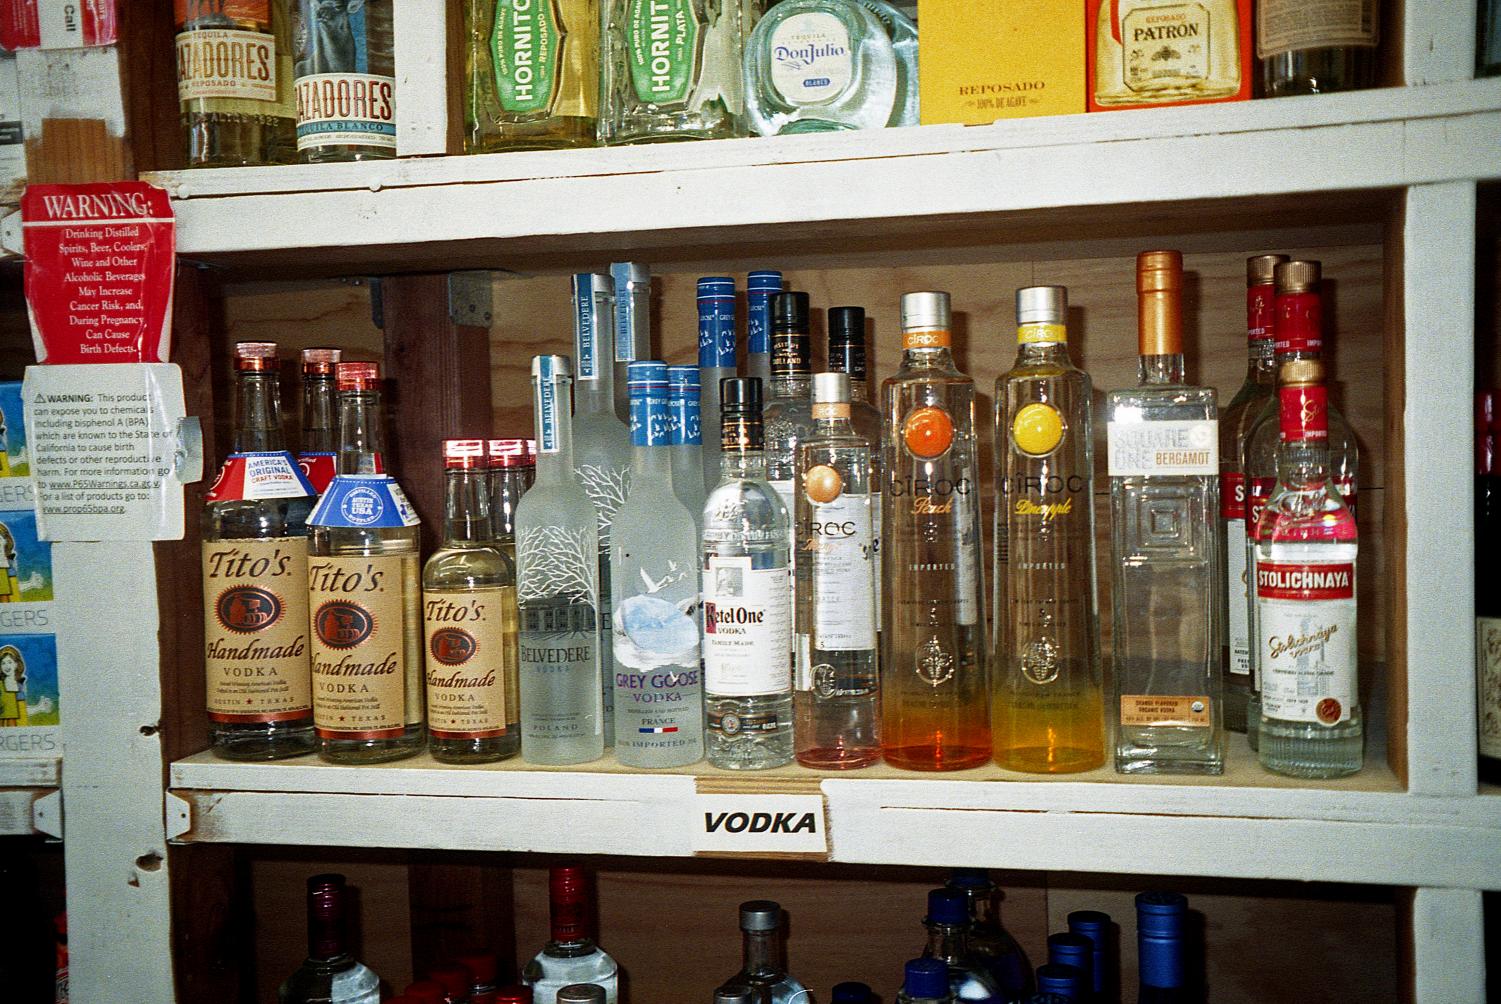 The vodka section in Tony’s Market & Liquor located on 2751 24th St. in San Francisco’s Mission District on April 29, 2022. (Maximo Vazquez / Xpress Magazine)